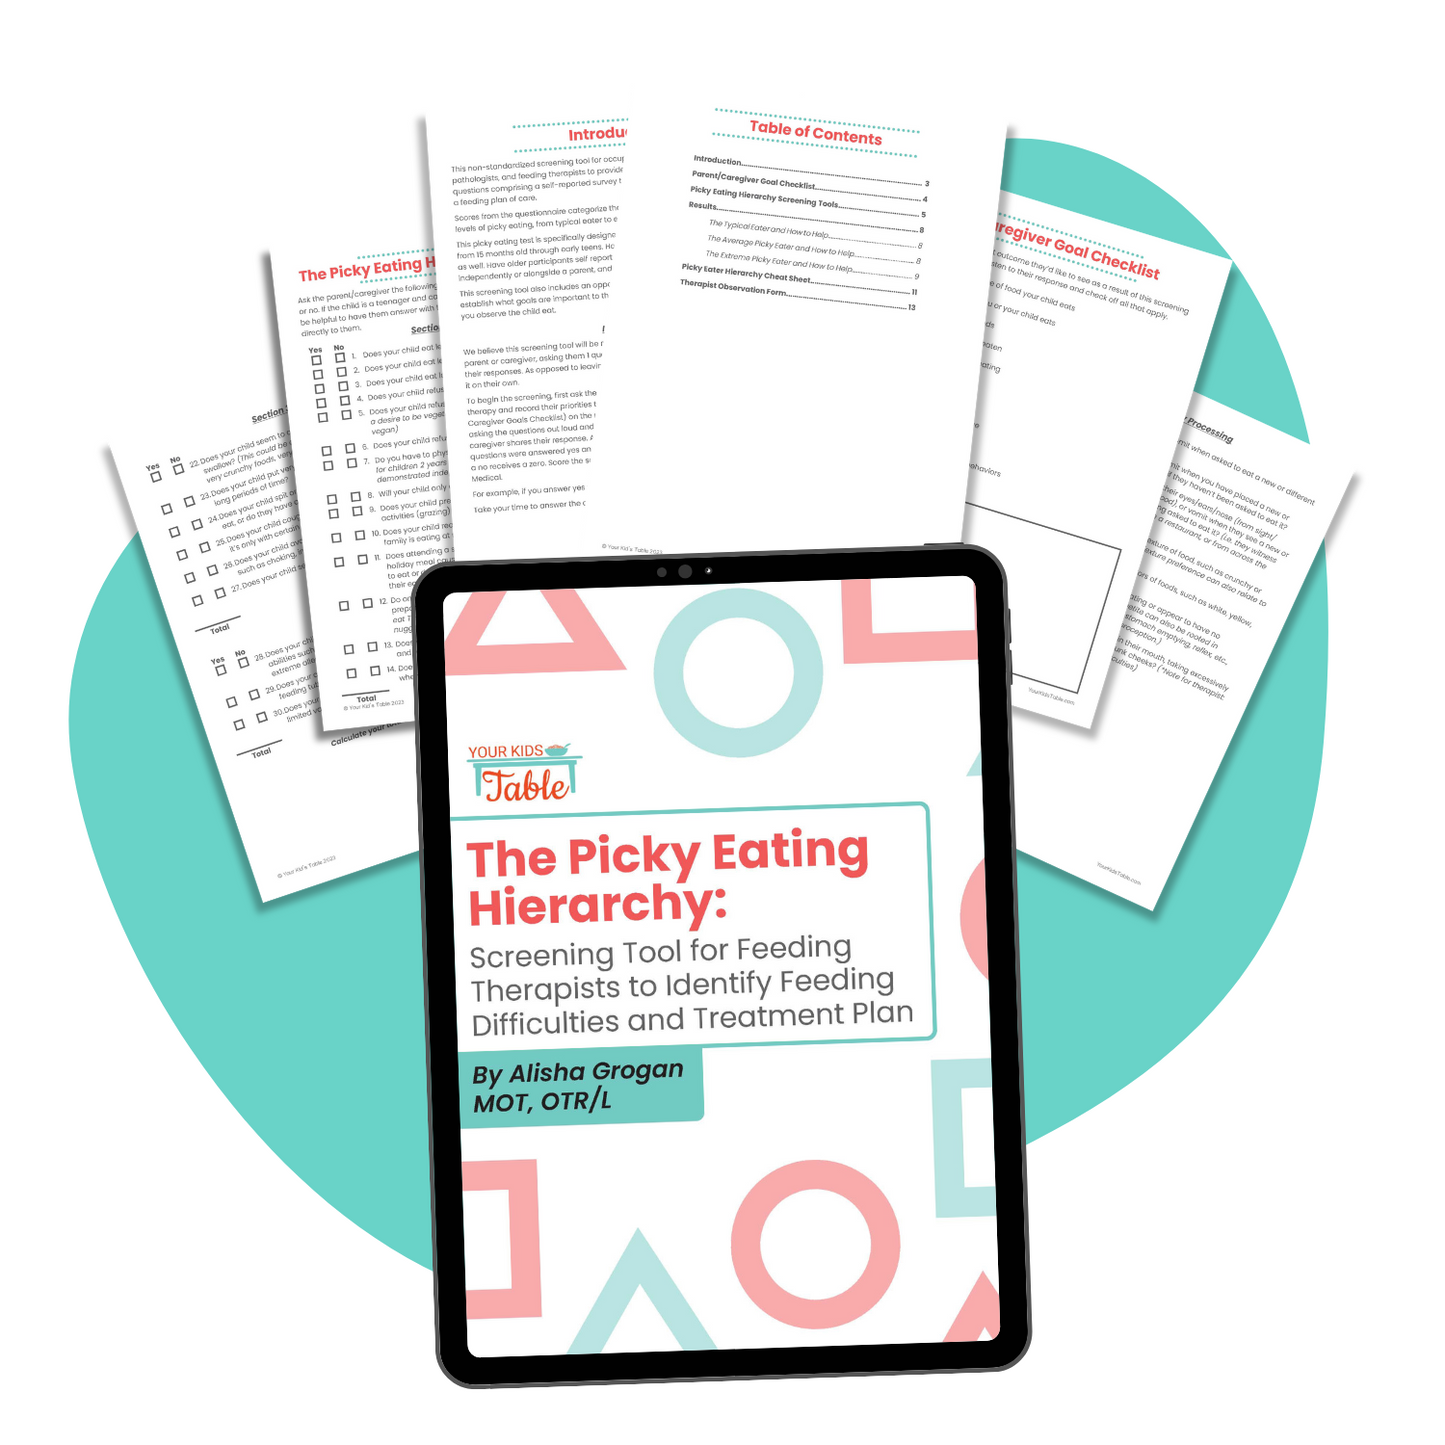 The Picky Eating Hierarchy: Screening Tool to Identify Feeding Difficulties and Treatment Plan